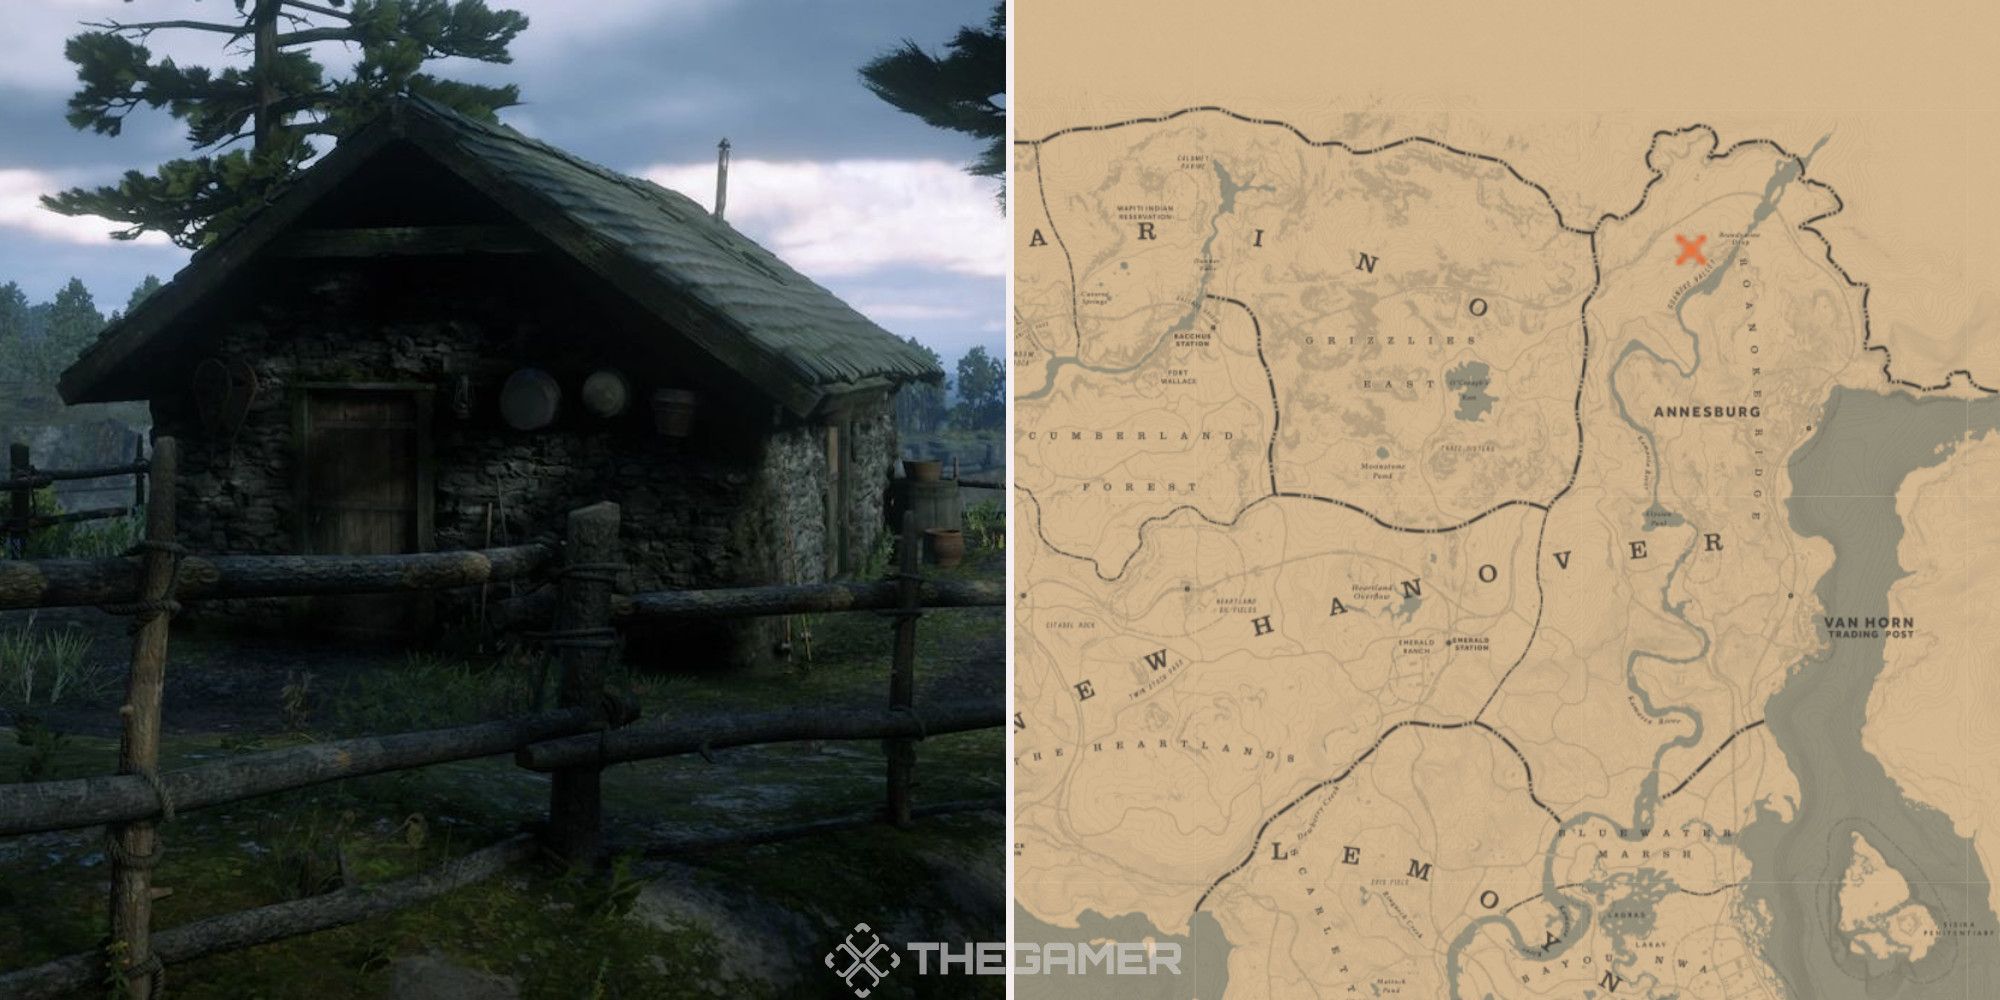 The Vetter cabin in Red Dead Redemption 2, next to an image of where it can be found marked on the map.